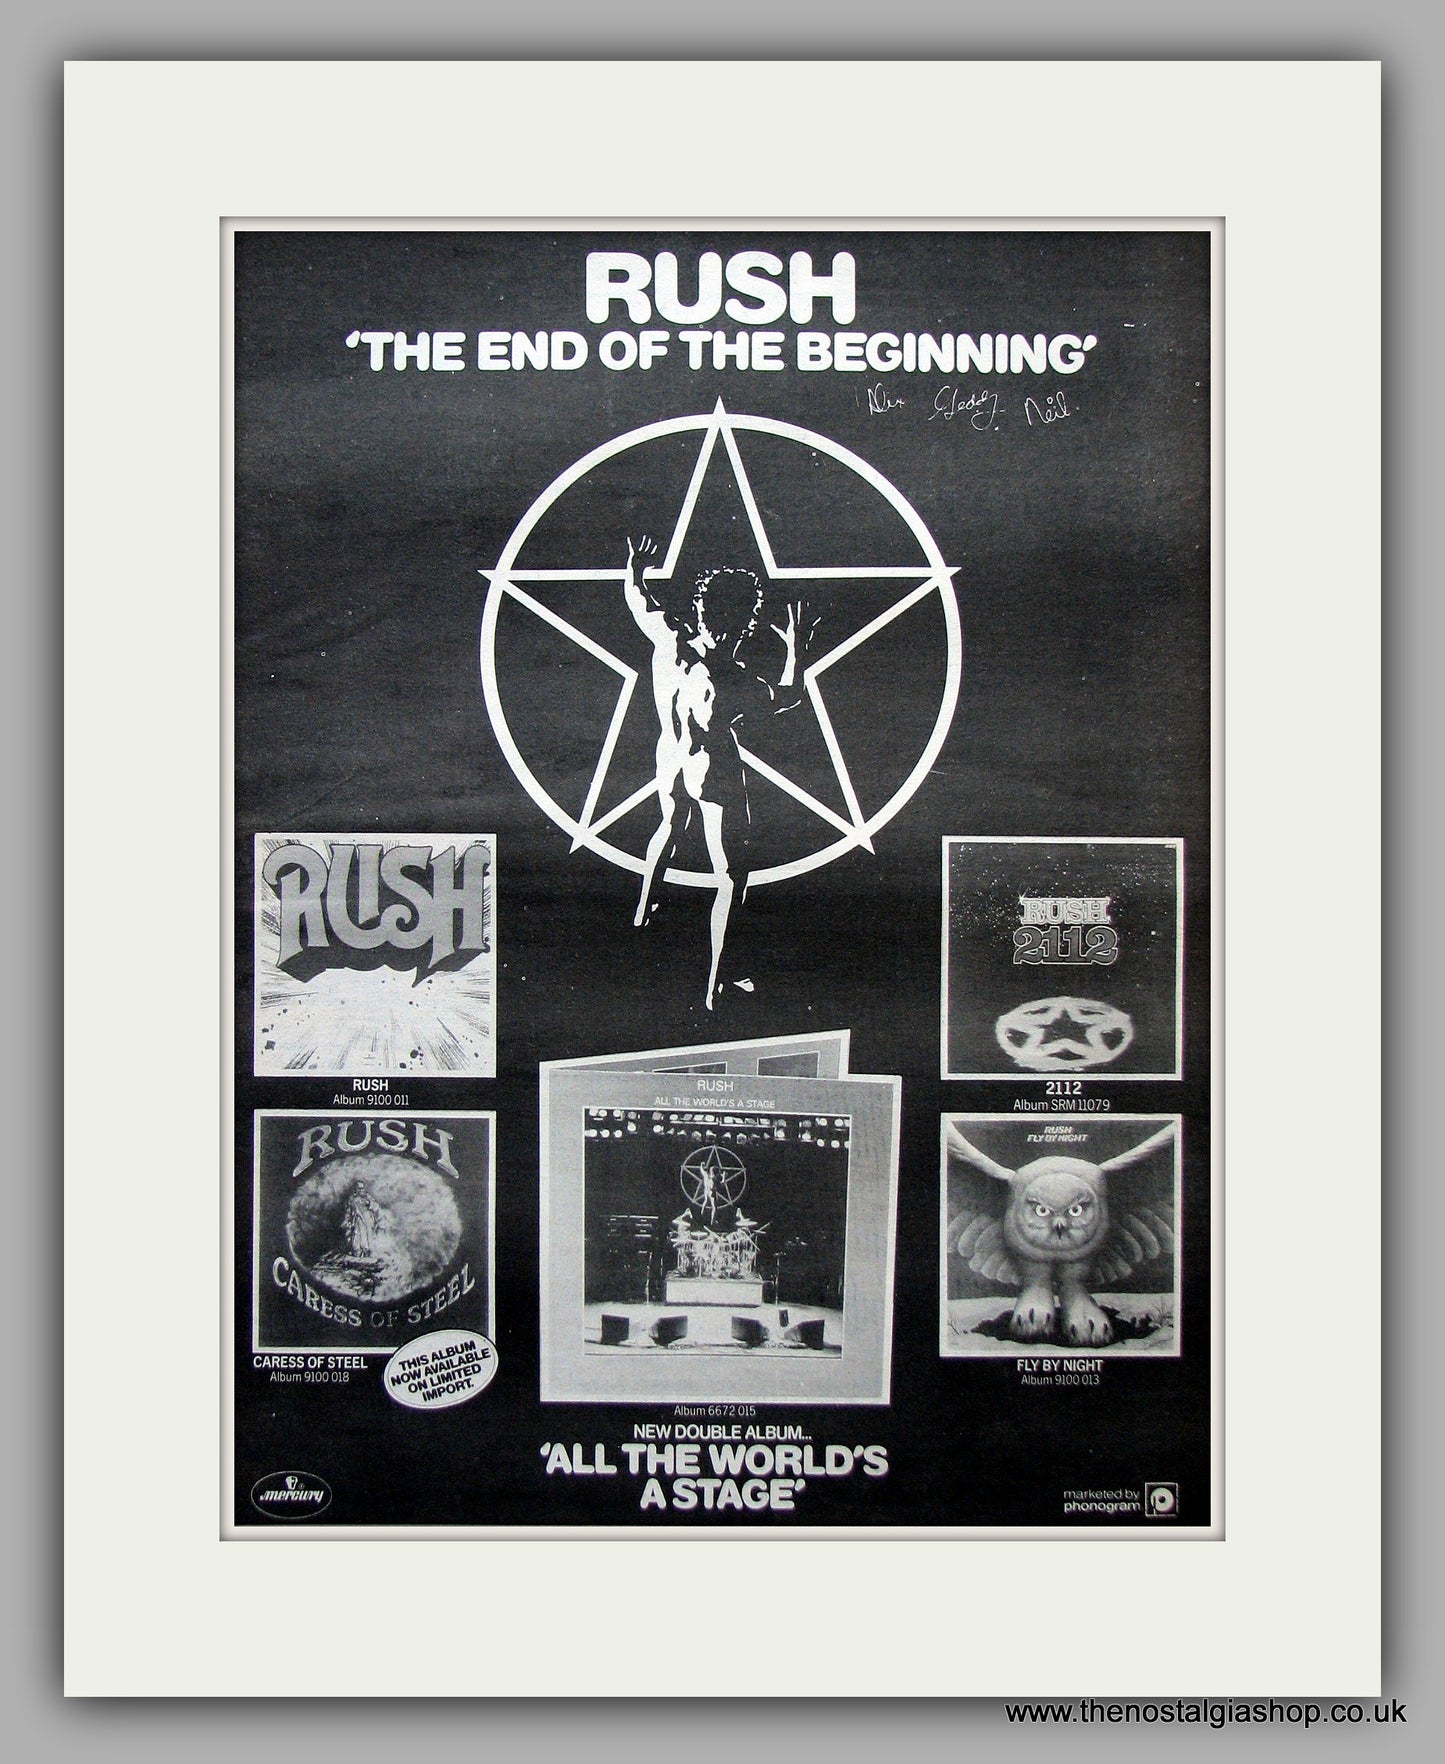 Rush. The End of The Beginning. Original Vintage Advert 1977 (ref AD10764)